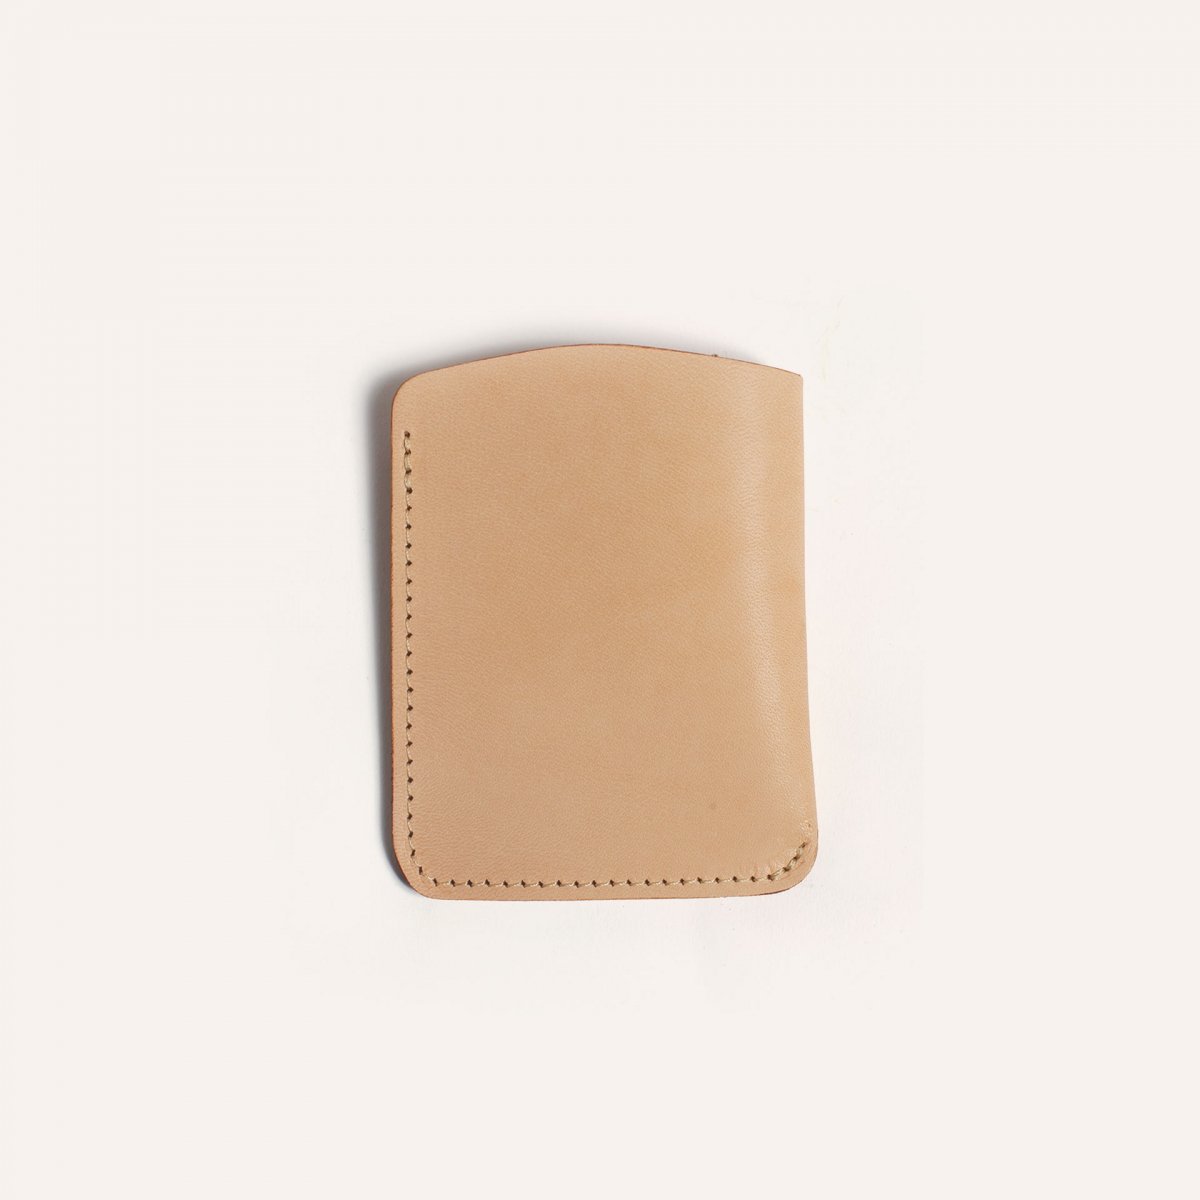 Intro business card holder - Natural (image n°2)